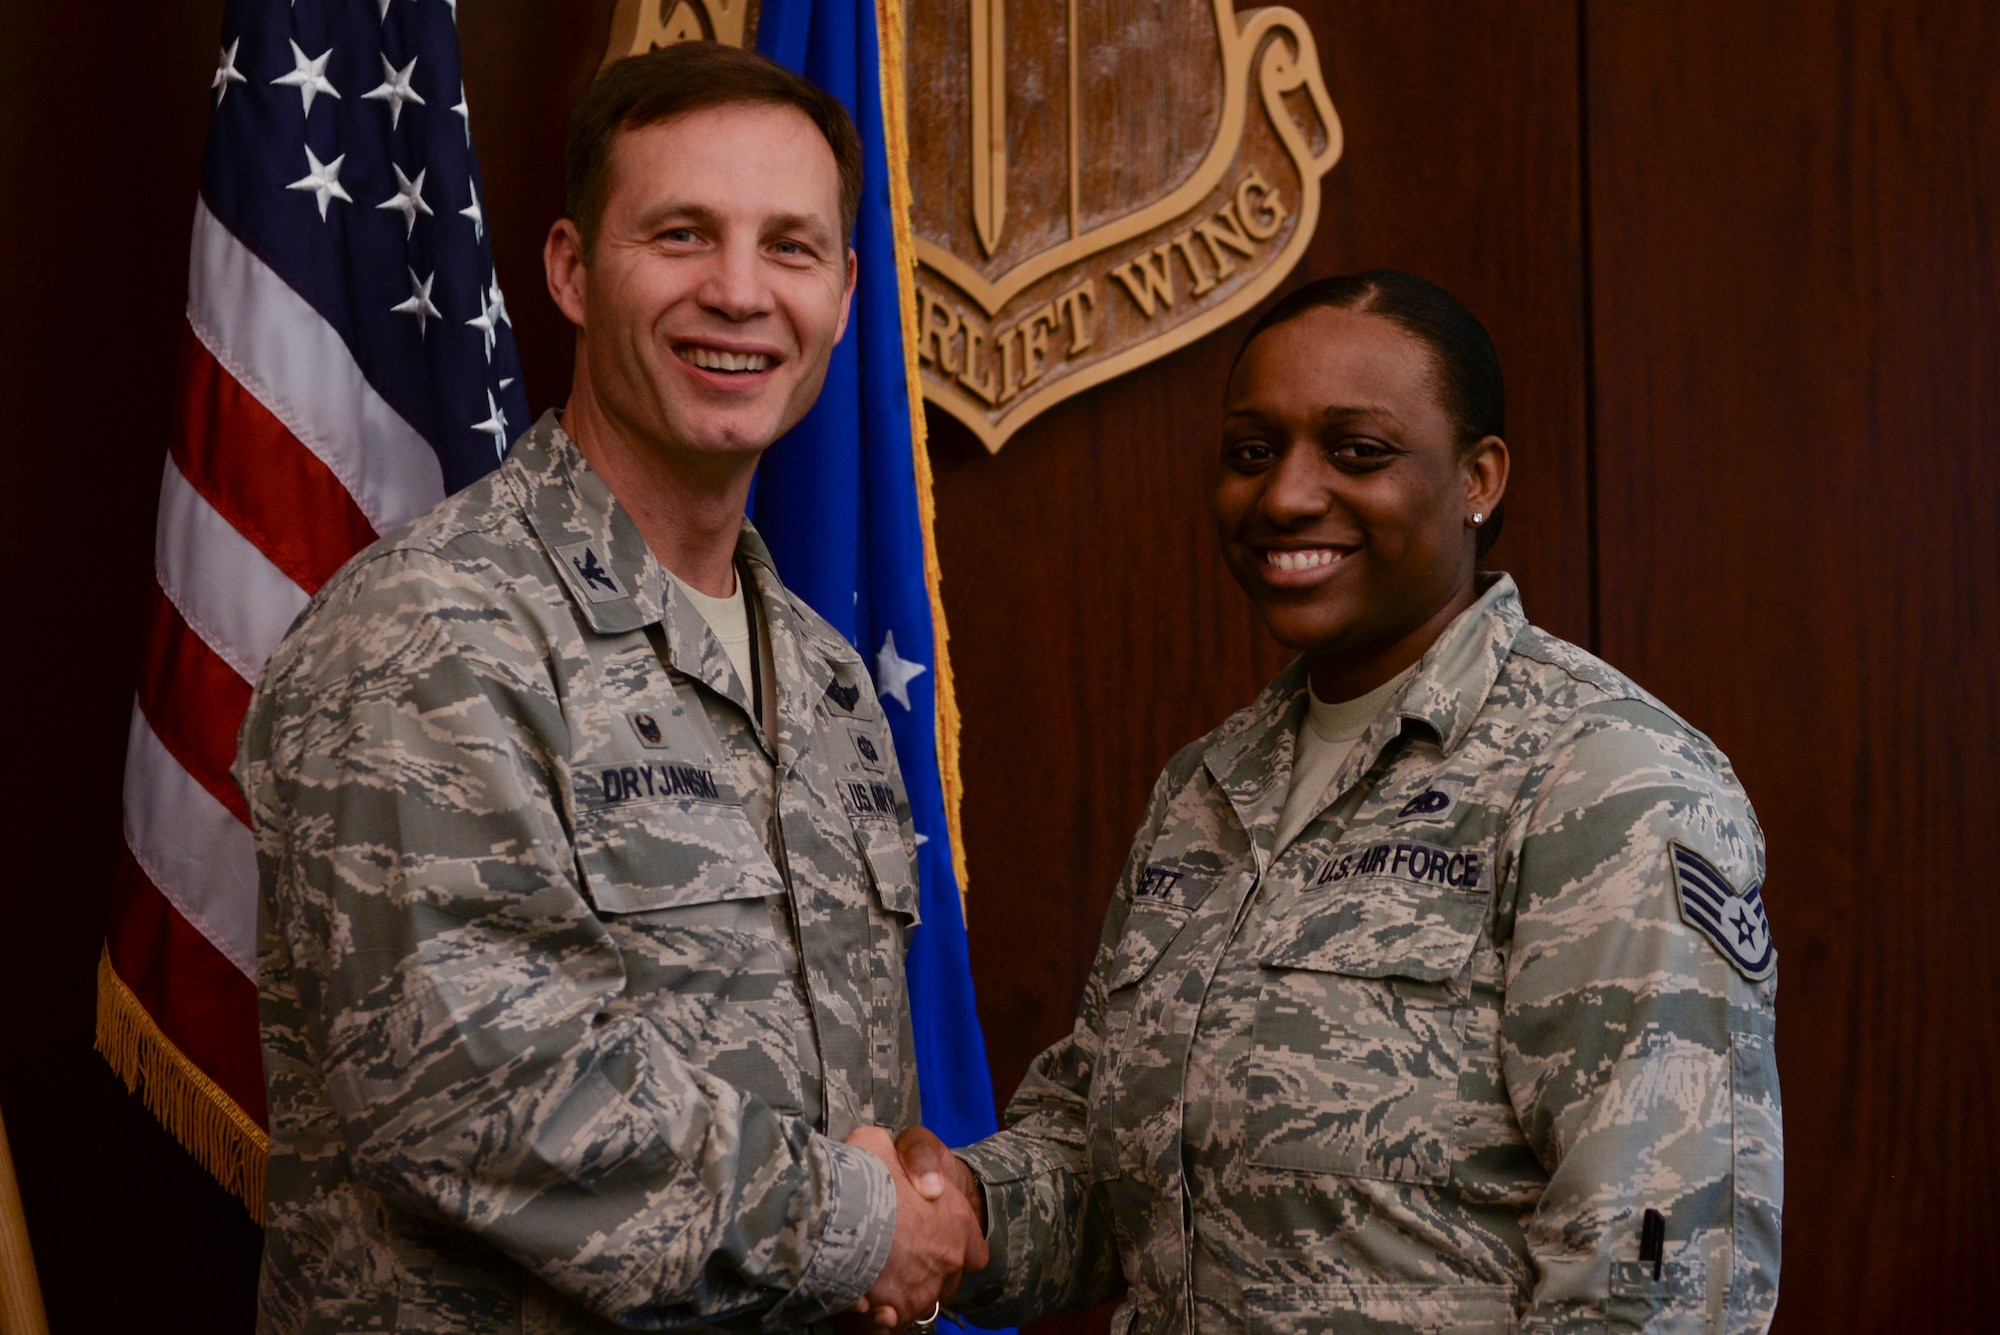 U.S. Air Force Col. James Dryjanksi, 314th Airlift Wing commander, left, congratulates U.S. Air Force Staff Sgt. Alescia Paggett, right, 314th Maintenance Group Plans and Scheduling NCO in charge, as the Combat Airlifter of the Week July 13, 2016, at Little Rock Air Force Base, Ark. Paggett created a daily, weekly and monthly maintenance schedule to ensure a 99.9 percent maintenance schedule effectiveness rate. (U.S. Air Force photo by Senior Airman Mercedes Taylor) 